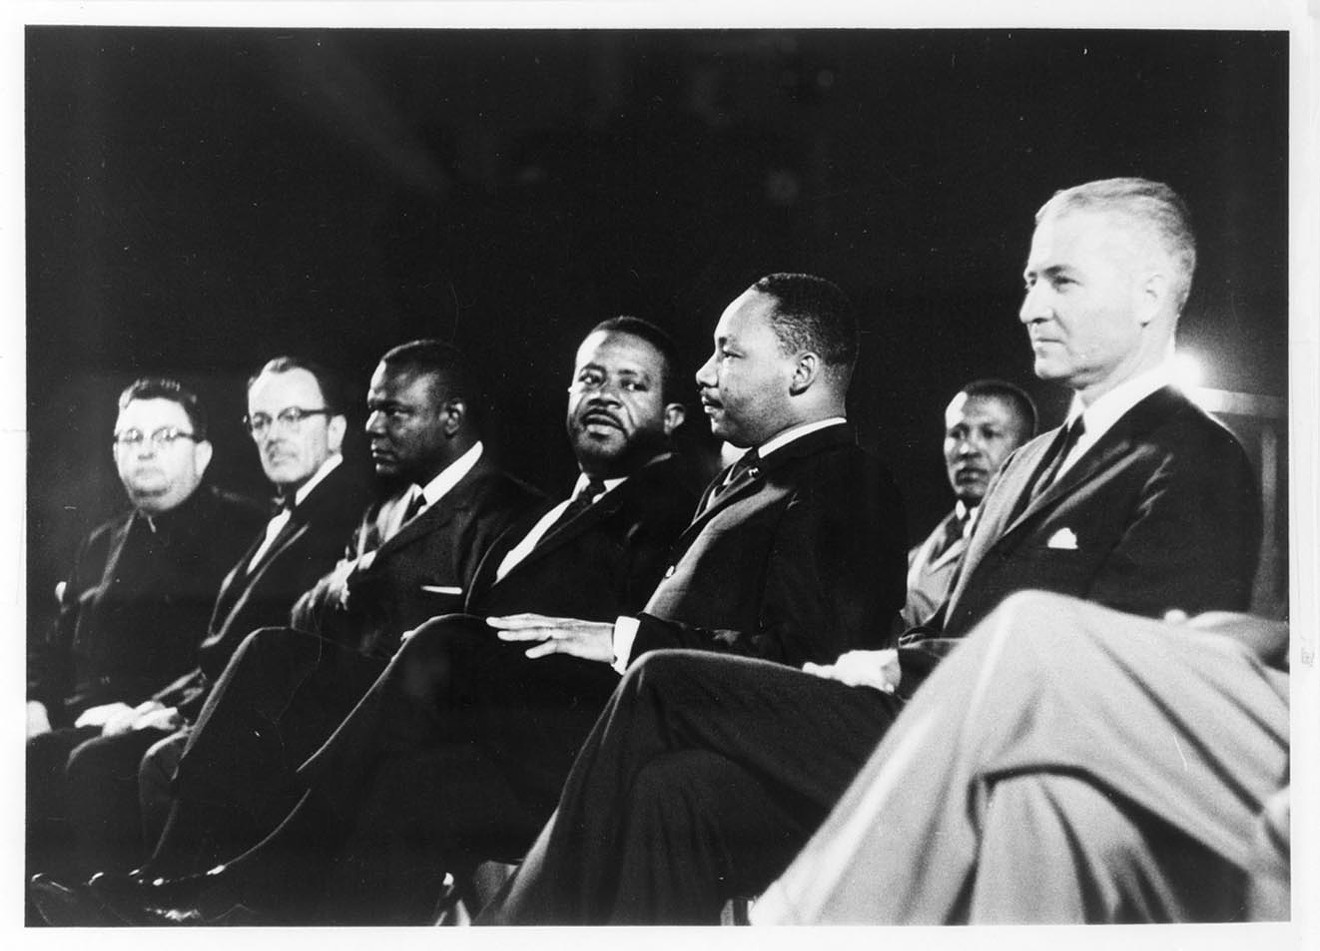 G. Homer Durham, Martin Luther King, Jr., Ralph Abernathy, an unidentified participant, Rev. Louis Eaton, and Msgr. Robert Donohoe at Arizona State University's Goodwin Stadium in 1964. King was invited by the Maricopa County chapter of the NAACP to deliver a speech to a crowd of 8,000 people at Arizona State University.